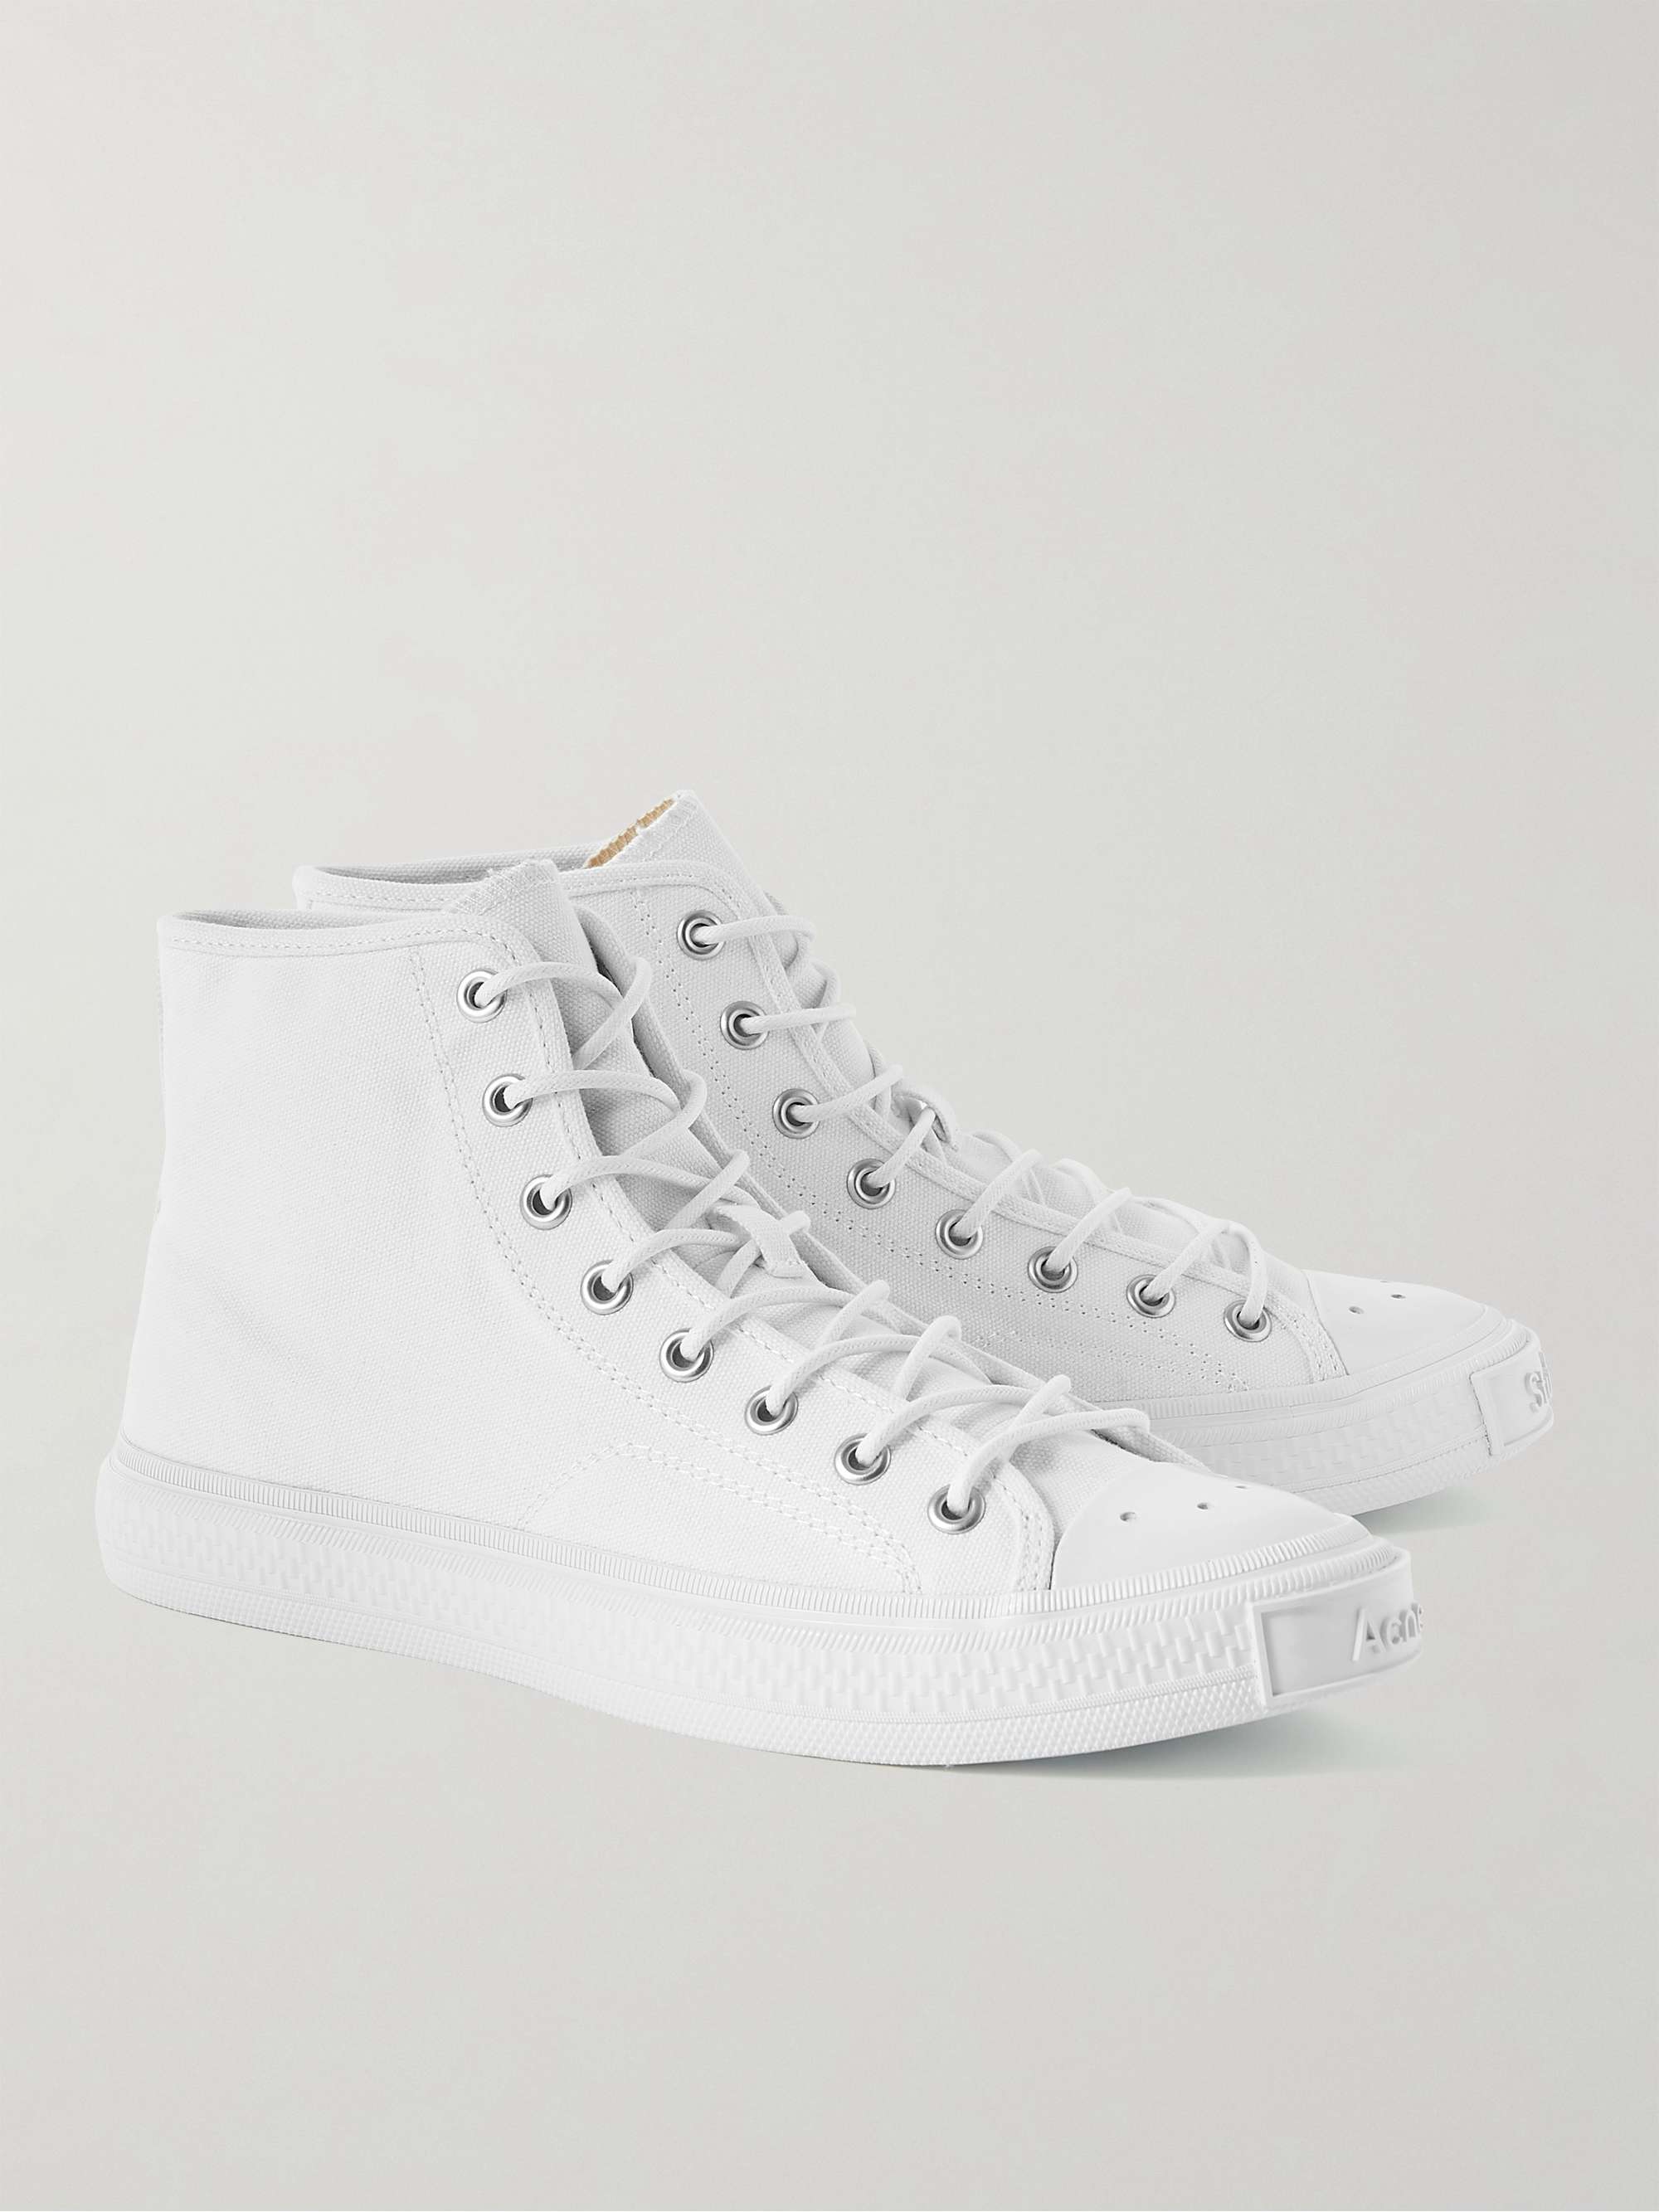 ACNE STUDIOS Rubber-Trimmed Canvas High-Top Sneakers for Men | MR PORTER